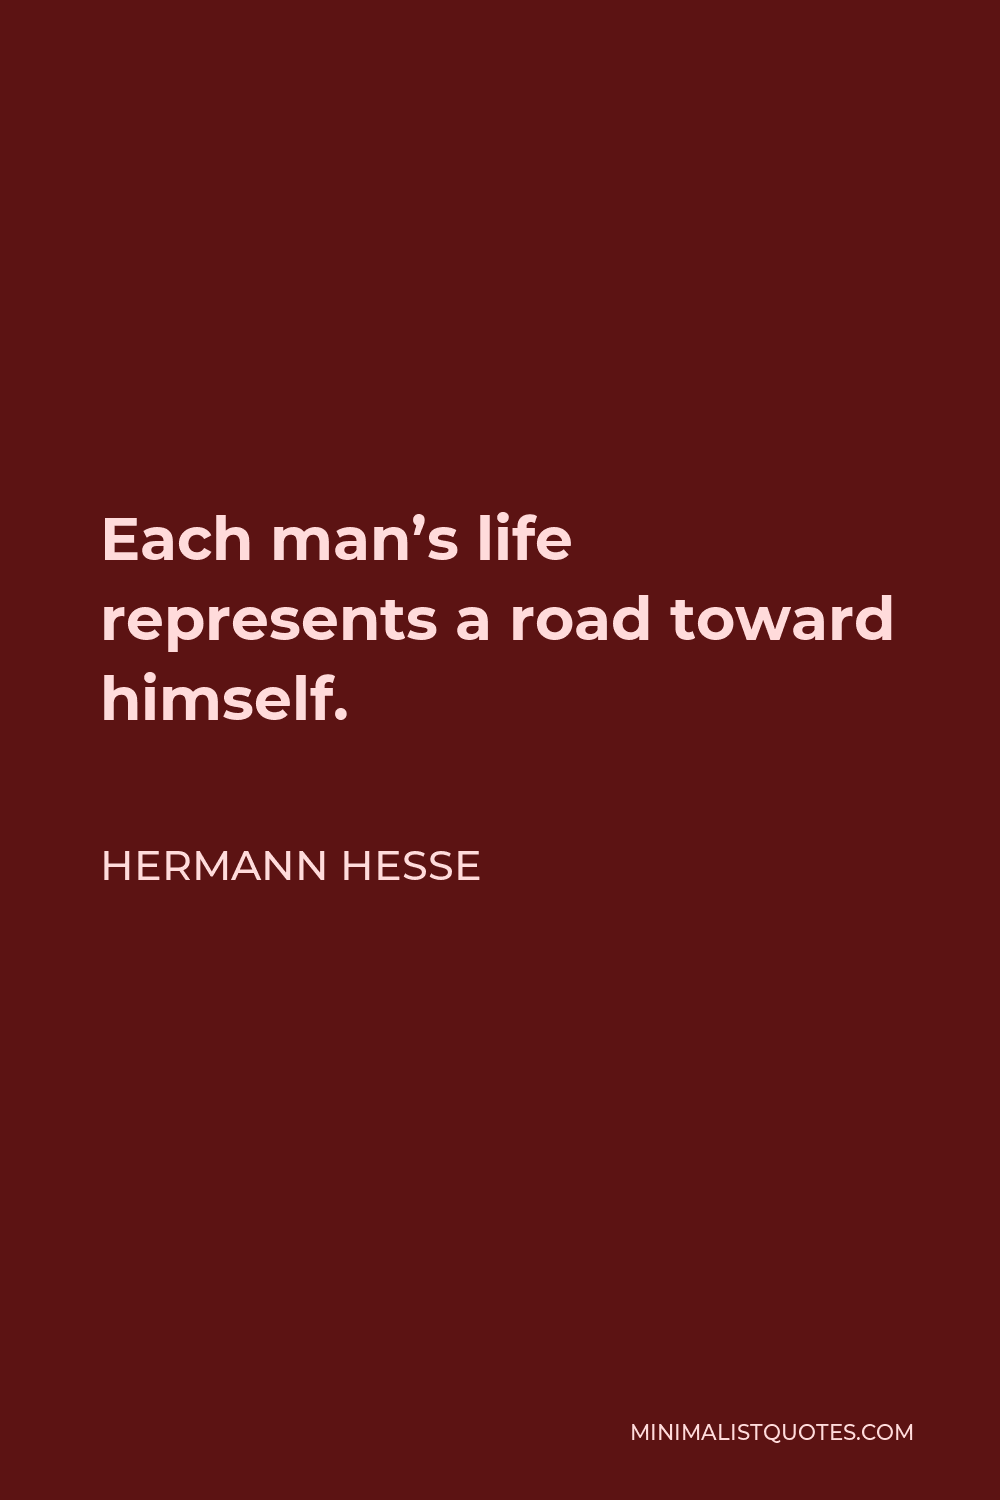 Hermann Hesse Quote - Each man’s life represents a road toward himself.